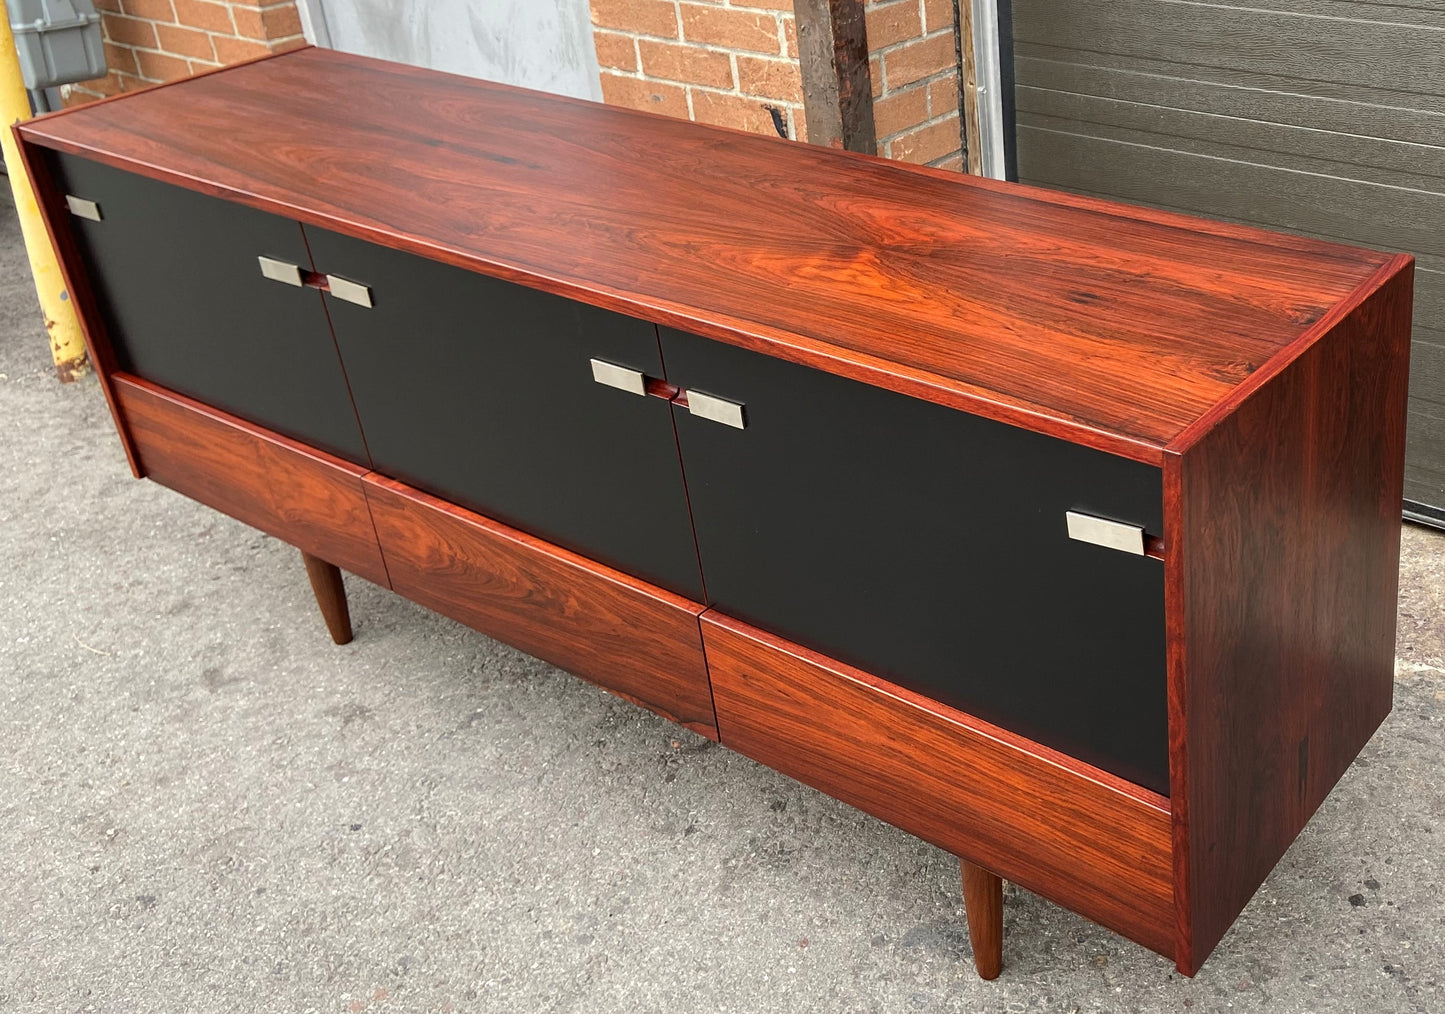 REFINISHED Mid Century Modern Rosewood Credenza w doors & drawers 73.5", Perfect